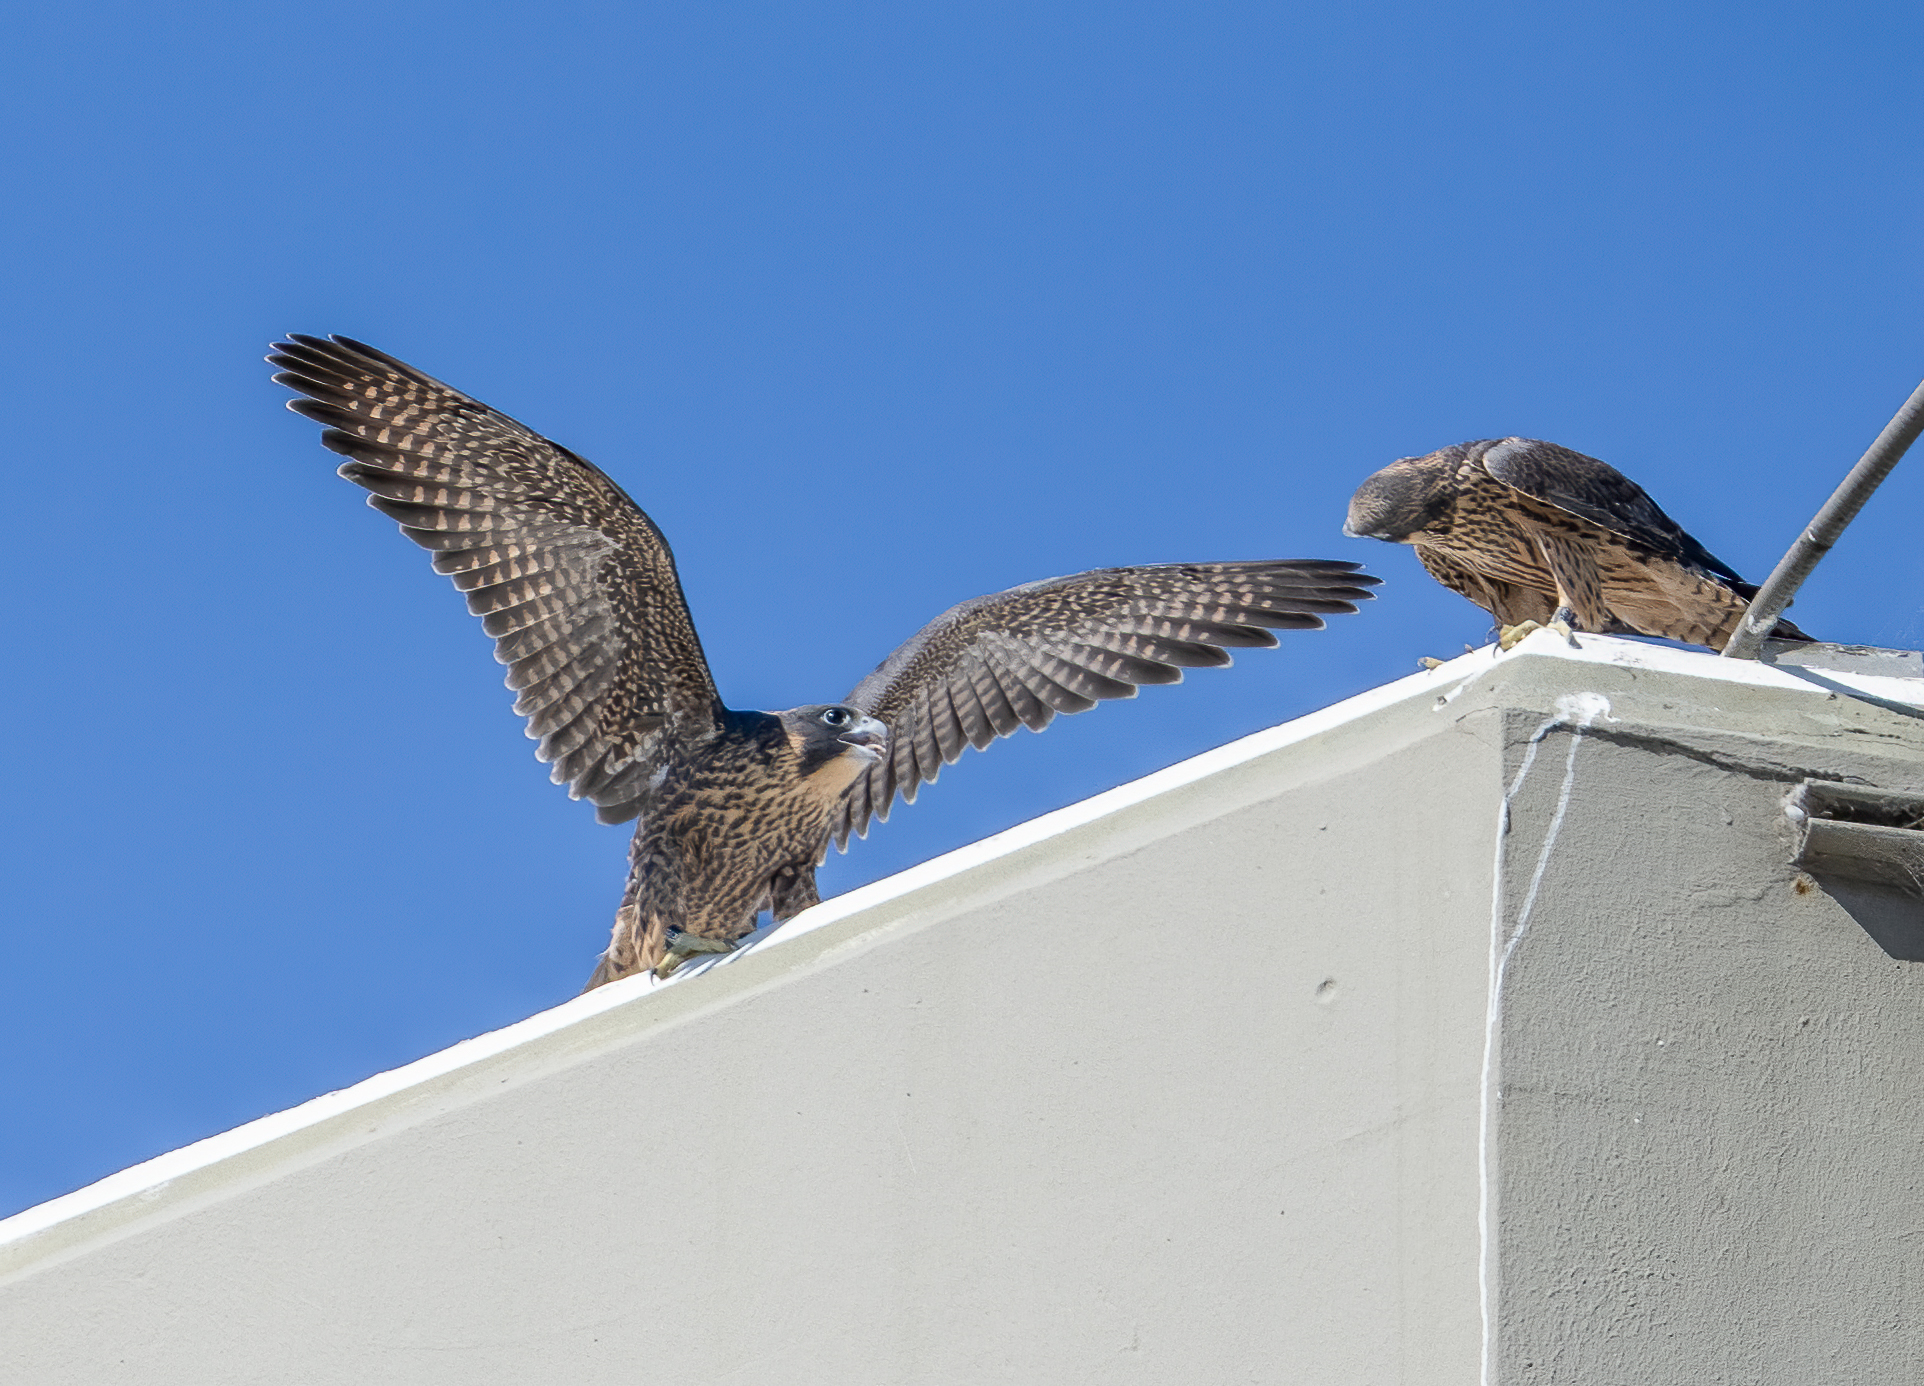 Falcon siblings Aurora and her brother Nox sit atop a campus building and are seemingly talking to each other.